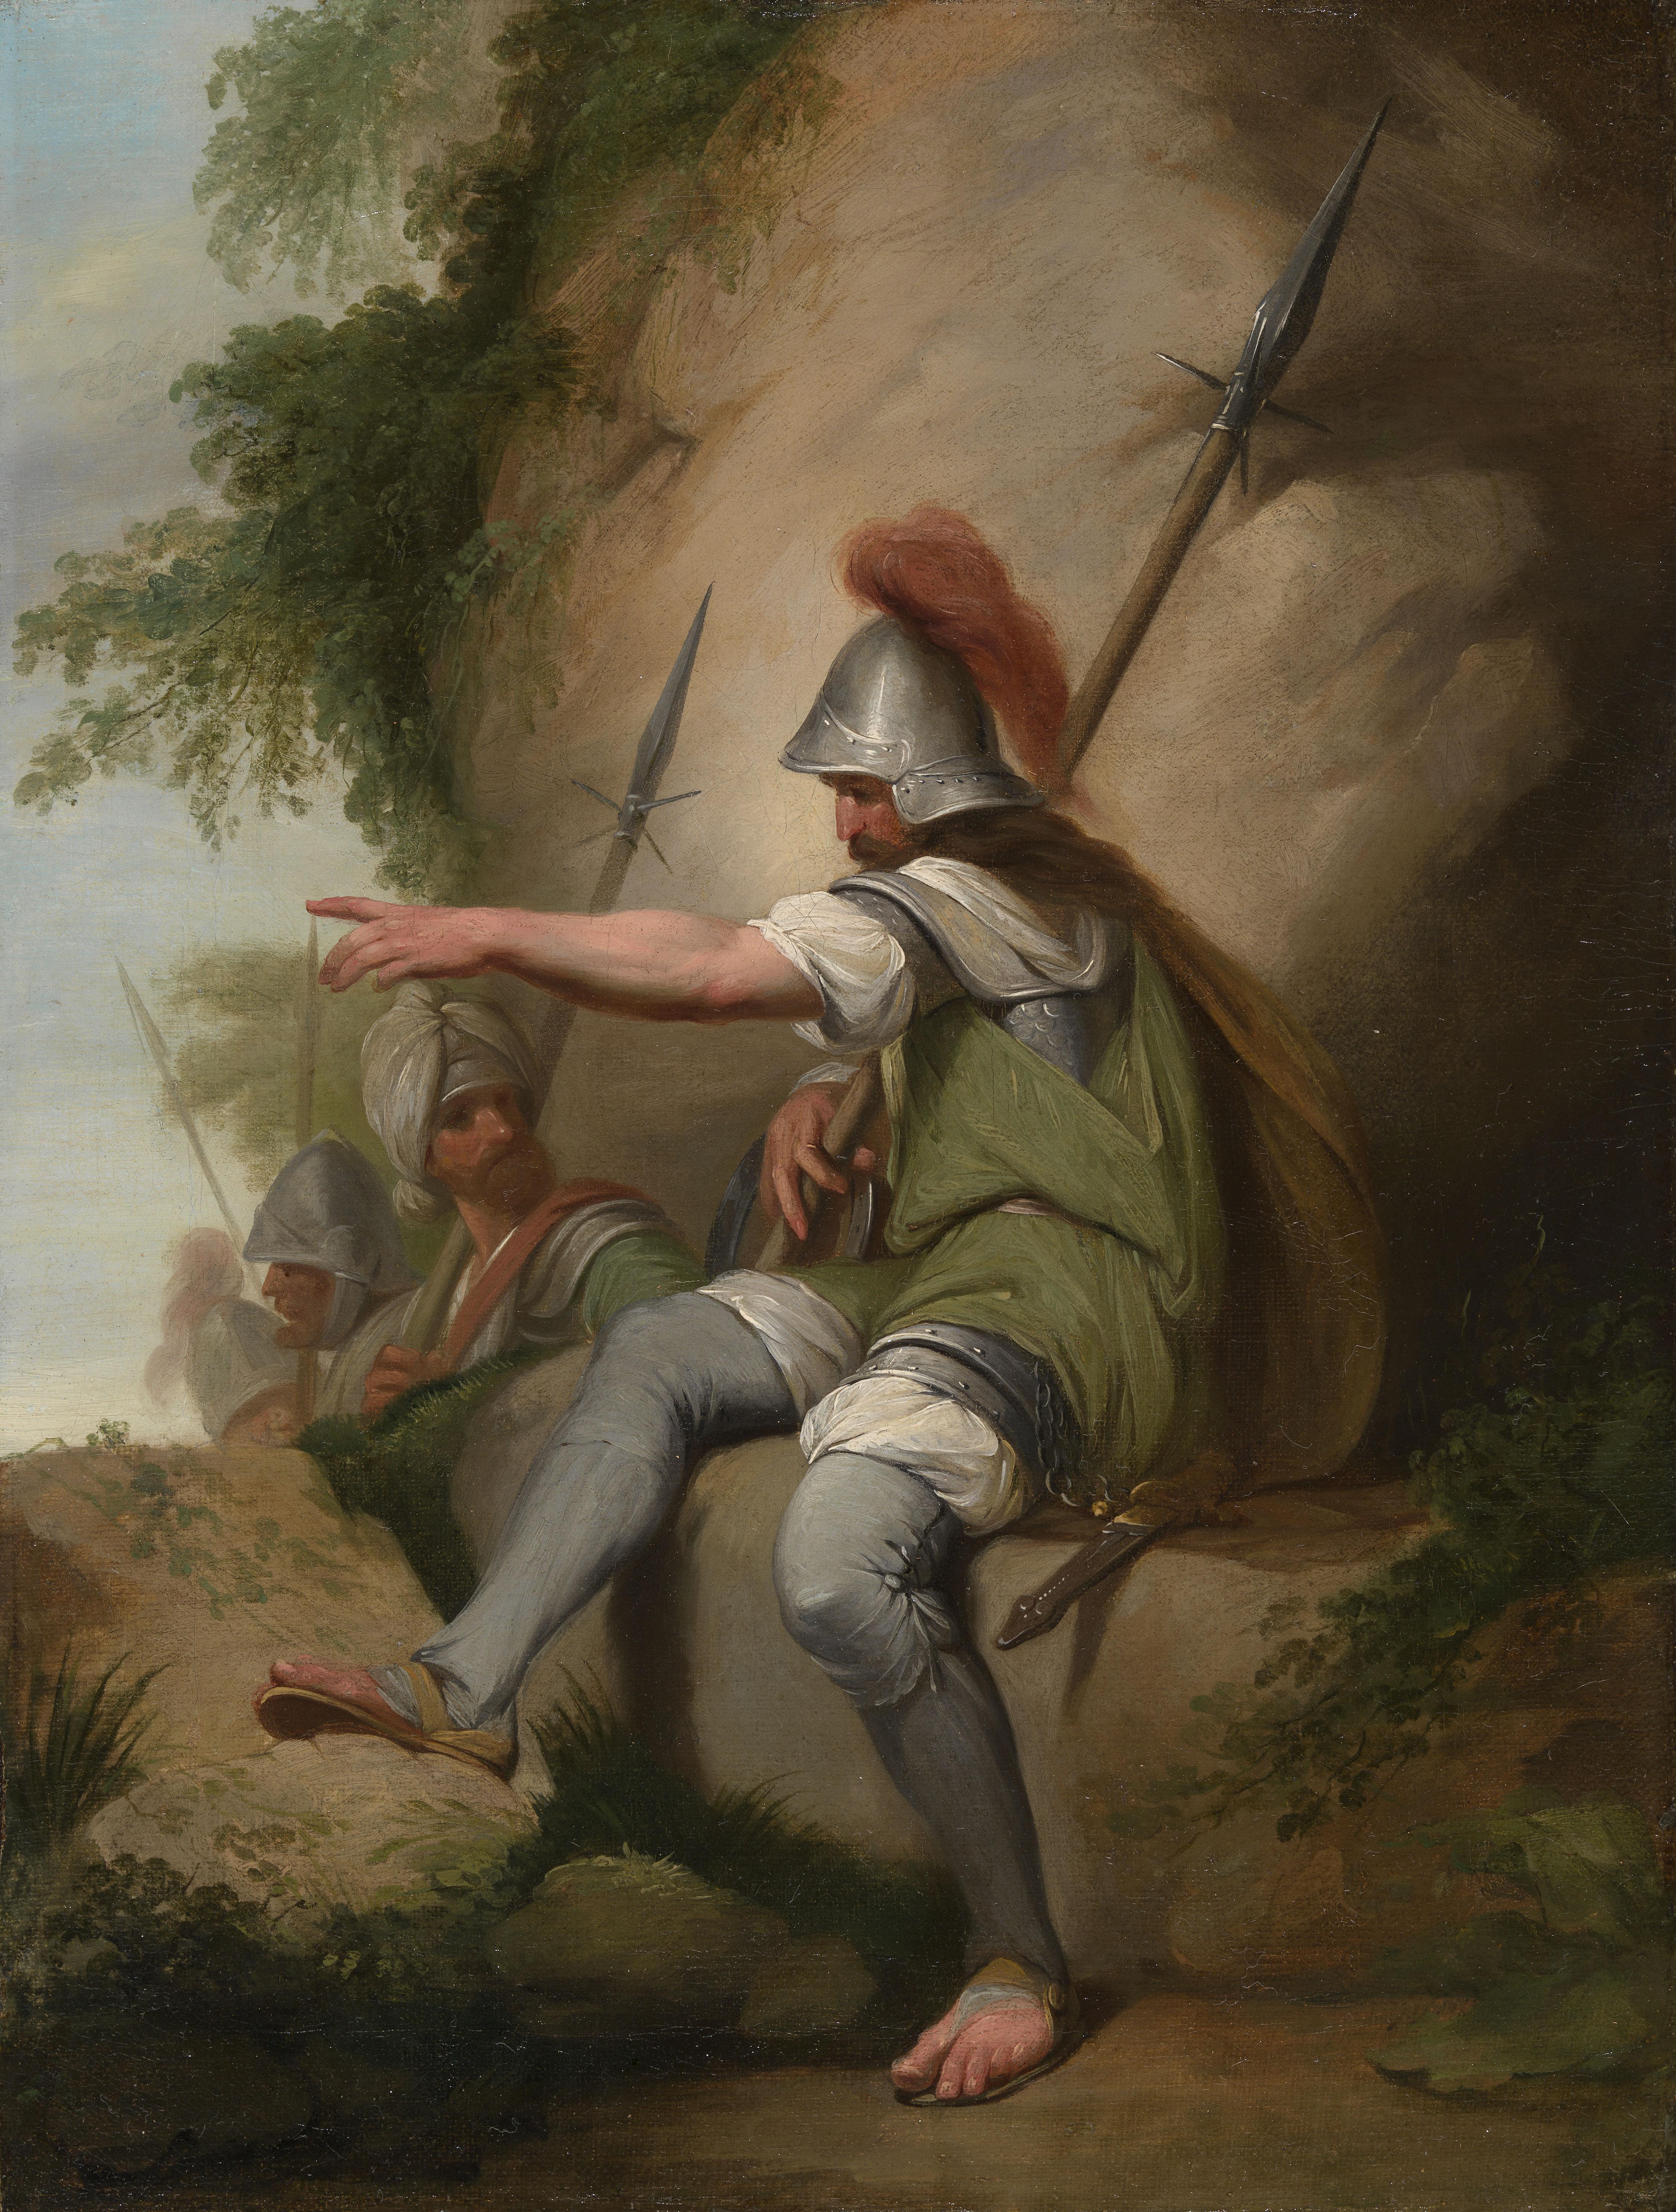 18th century painting of a bandit taking up his post - Painting by John Hamilton Mortimer